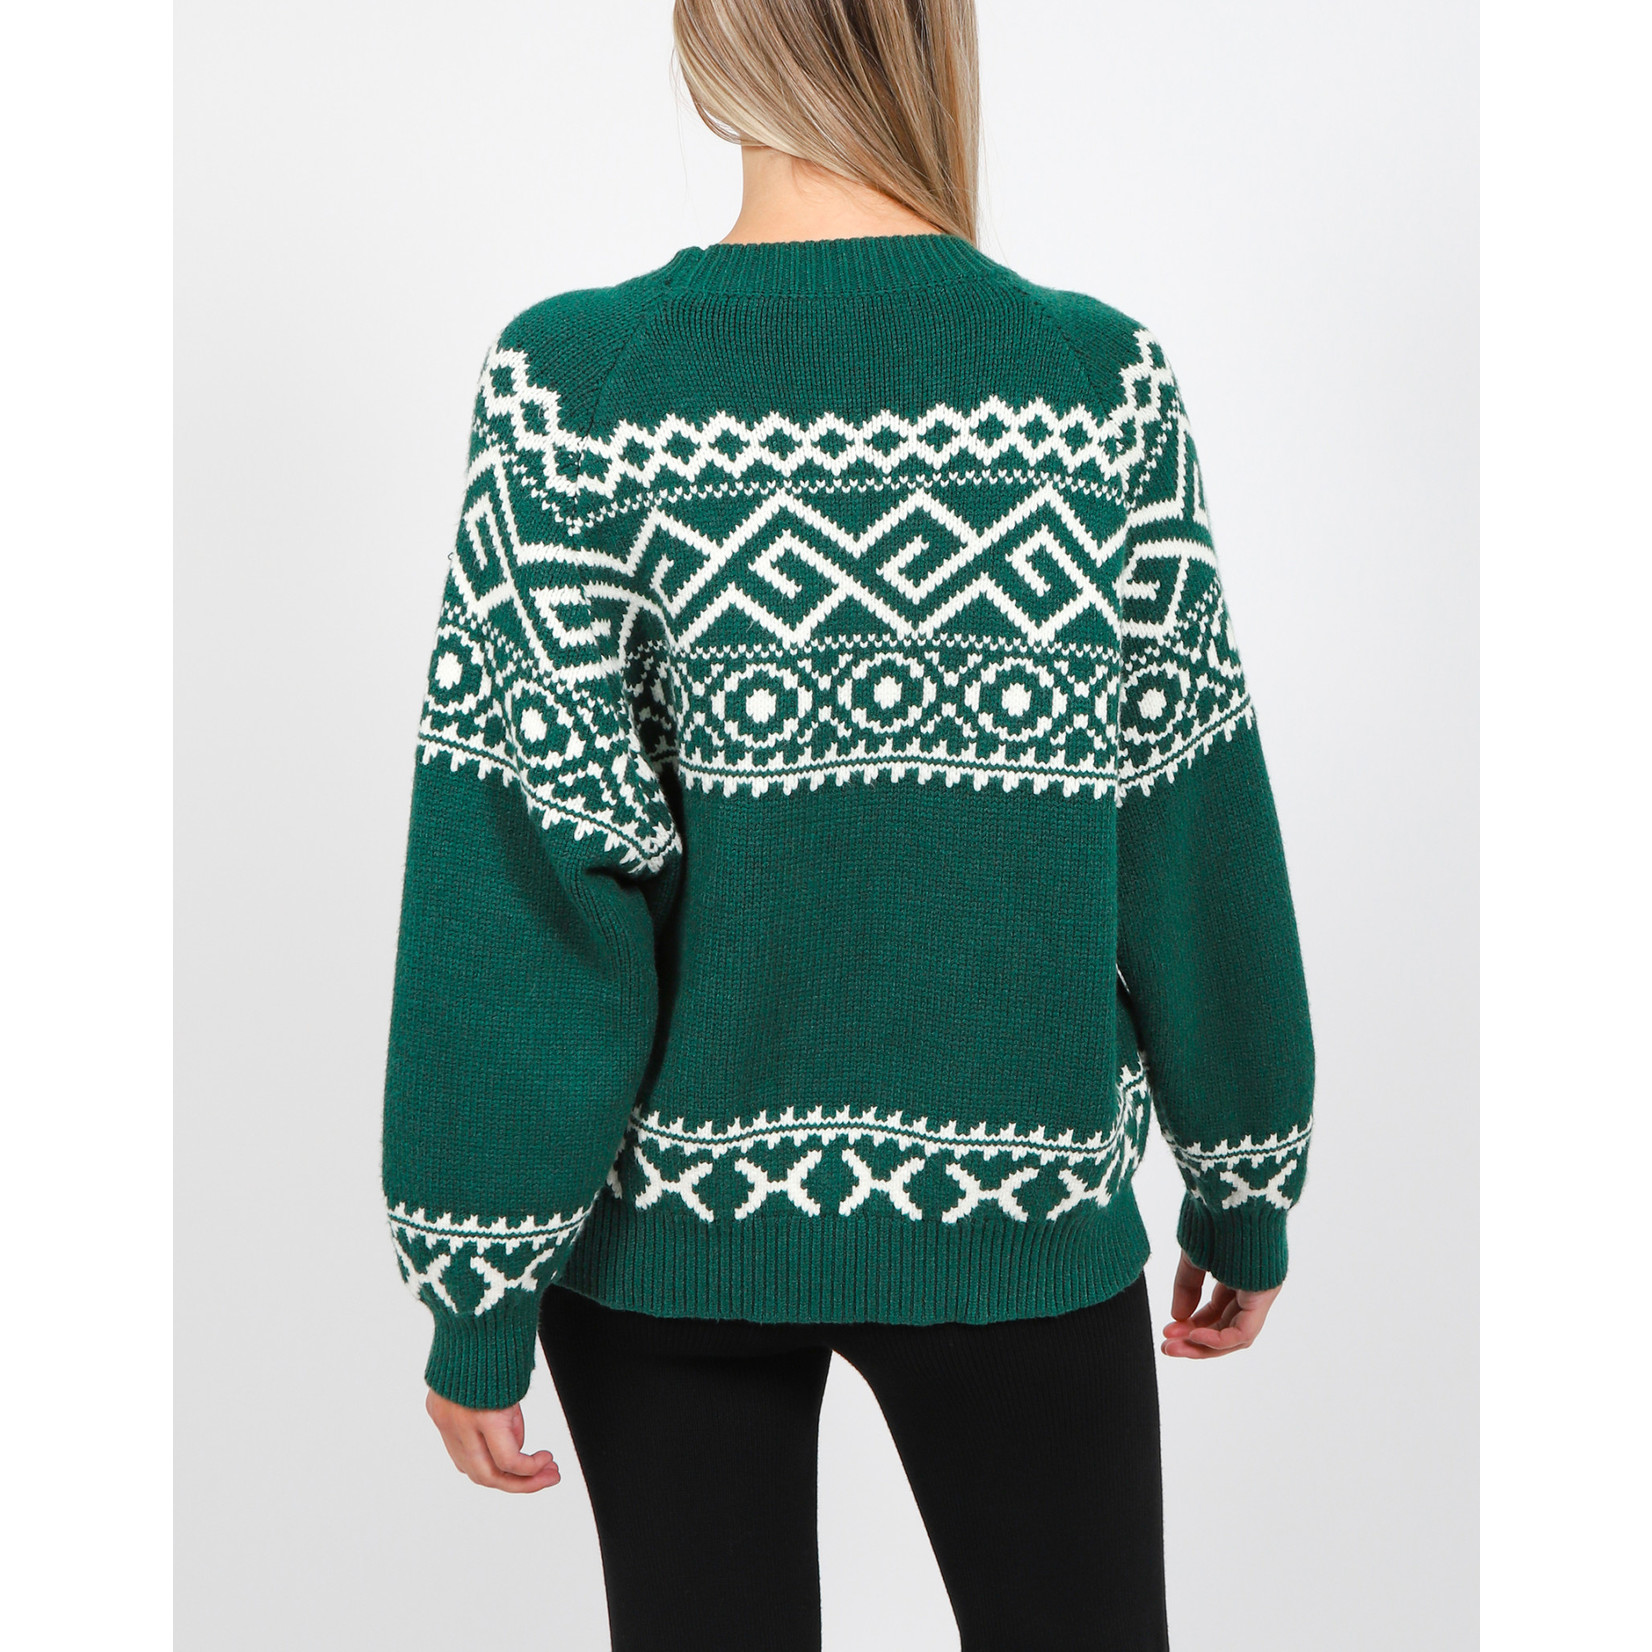 Brunette the Label Brunette the Label NYBF Fair Isle Emerald Knit Sweater